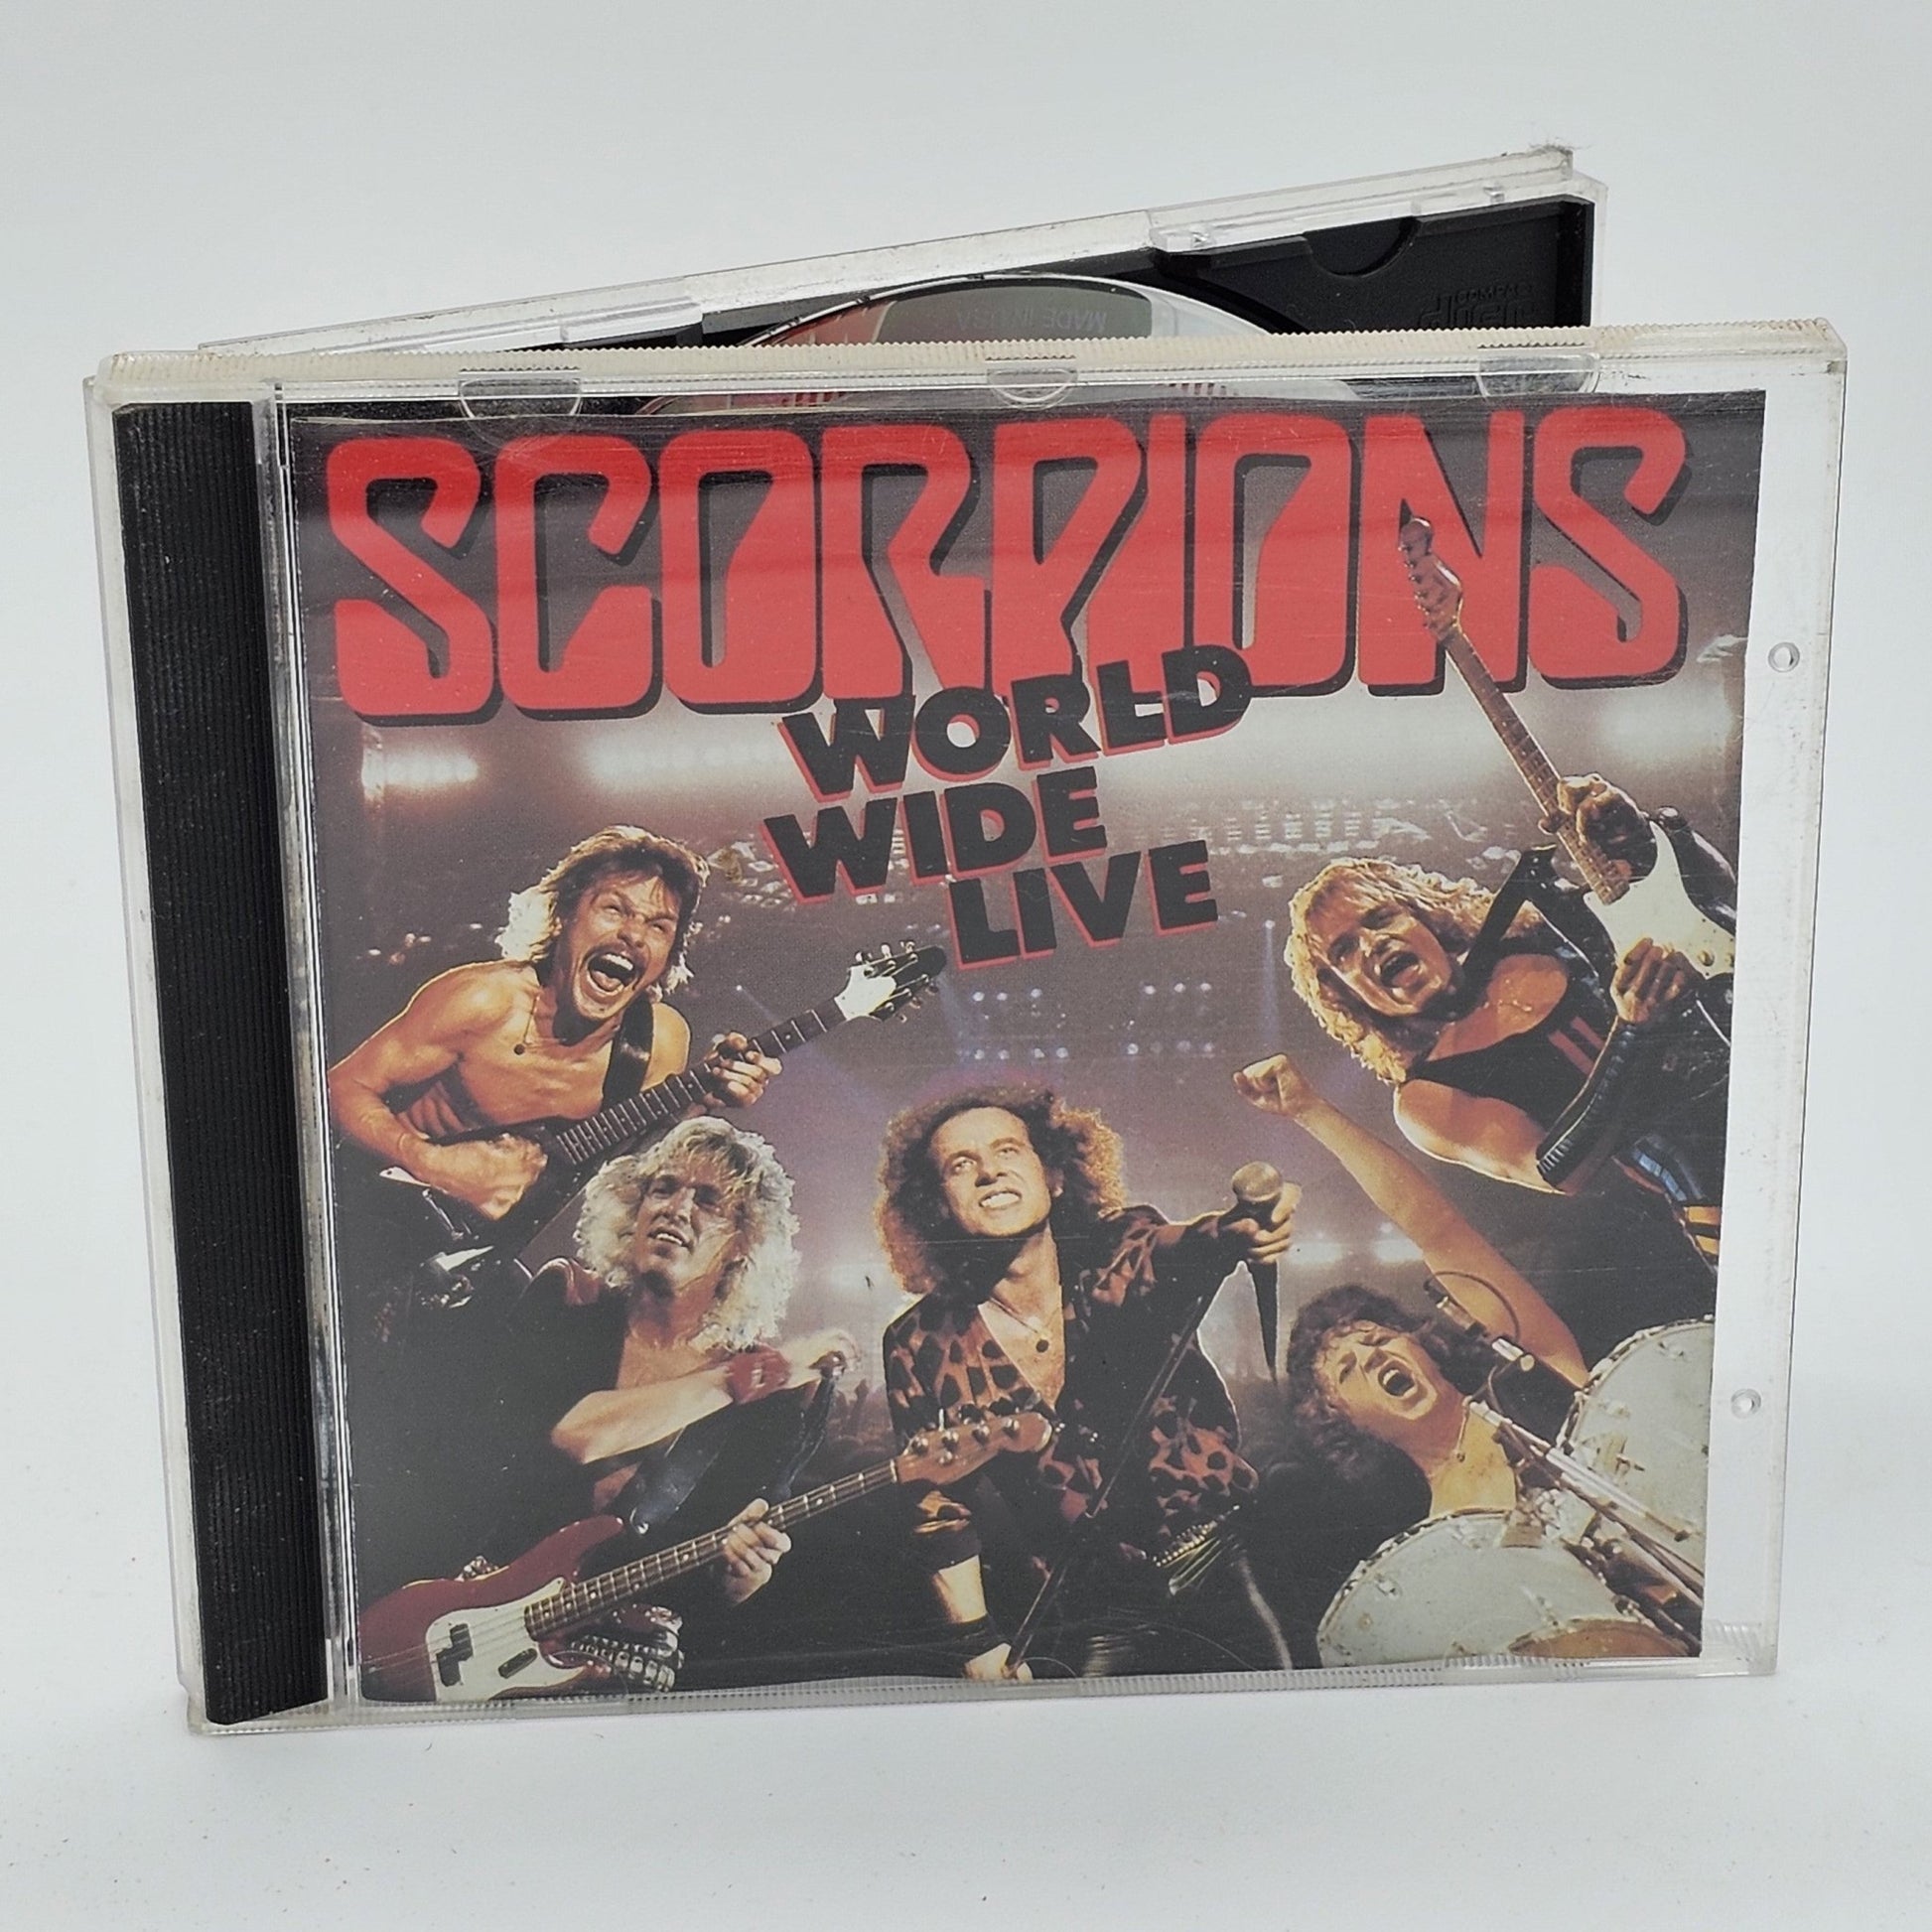 Mercury Records - Scorpions | World Wide Live | CD - Compact Disc - Steady Bunny Shop